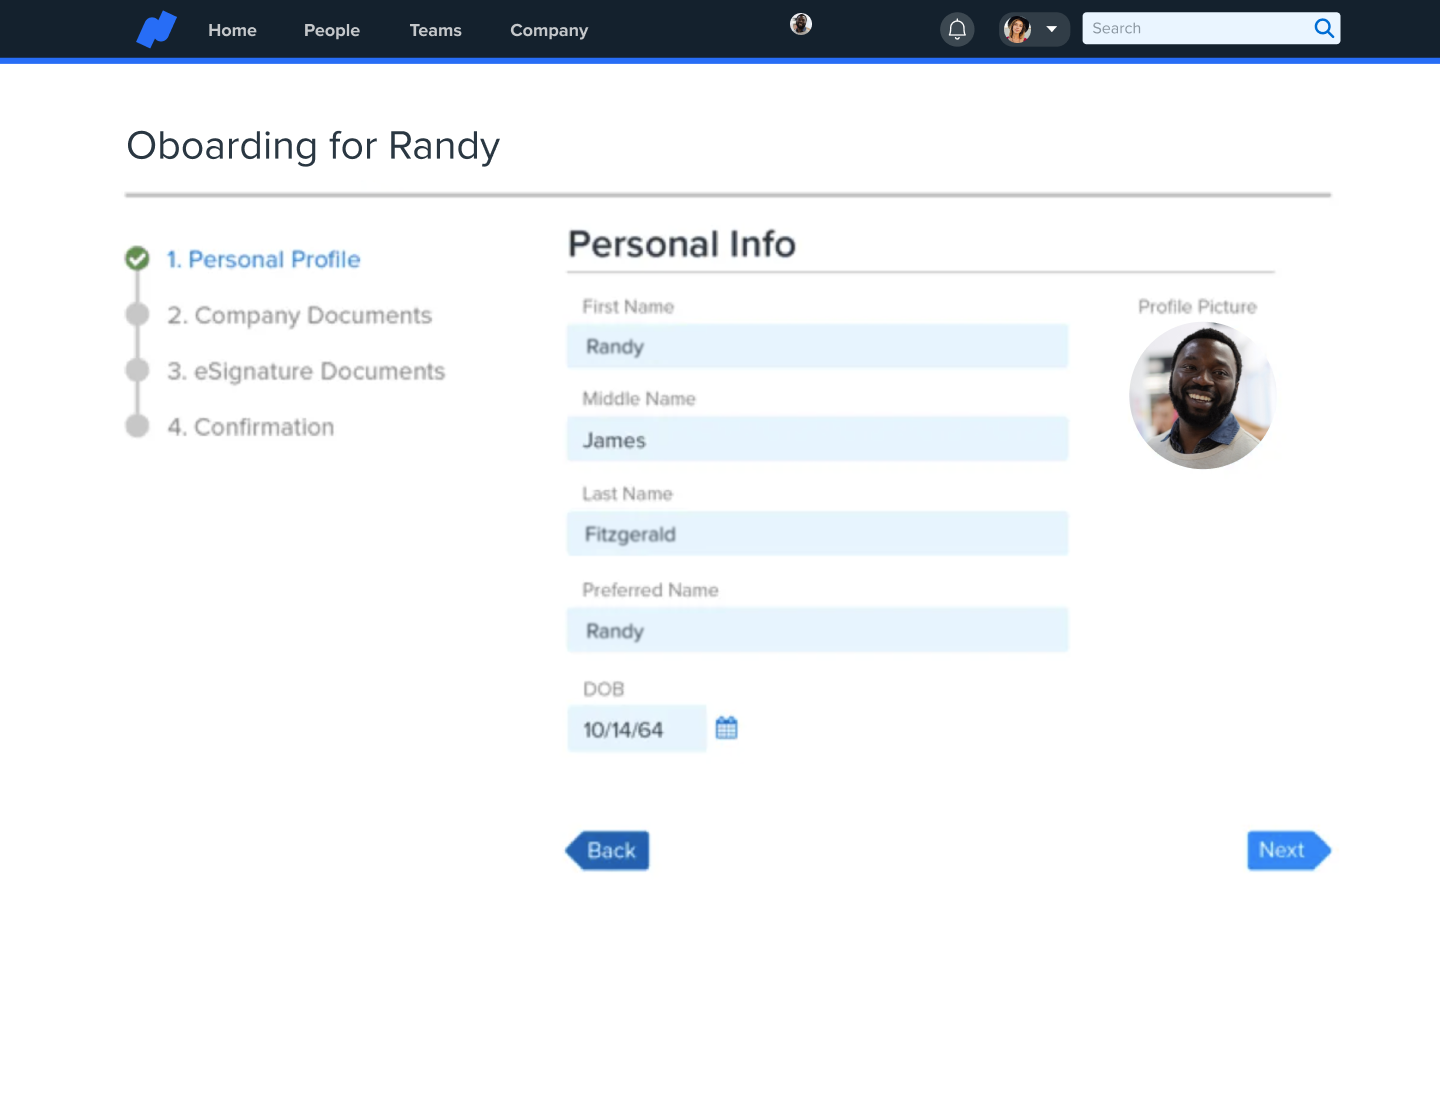 Employee Onboarding: save time and engage new hires before they ever walk in the door with customizable employee onboarding workflows complete with eSignature functionality